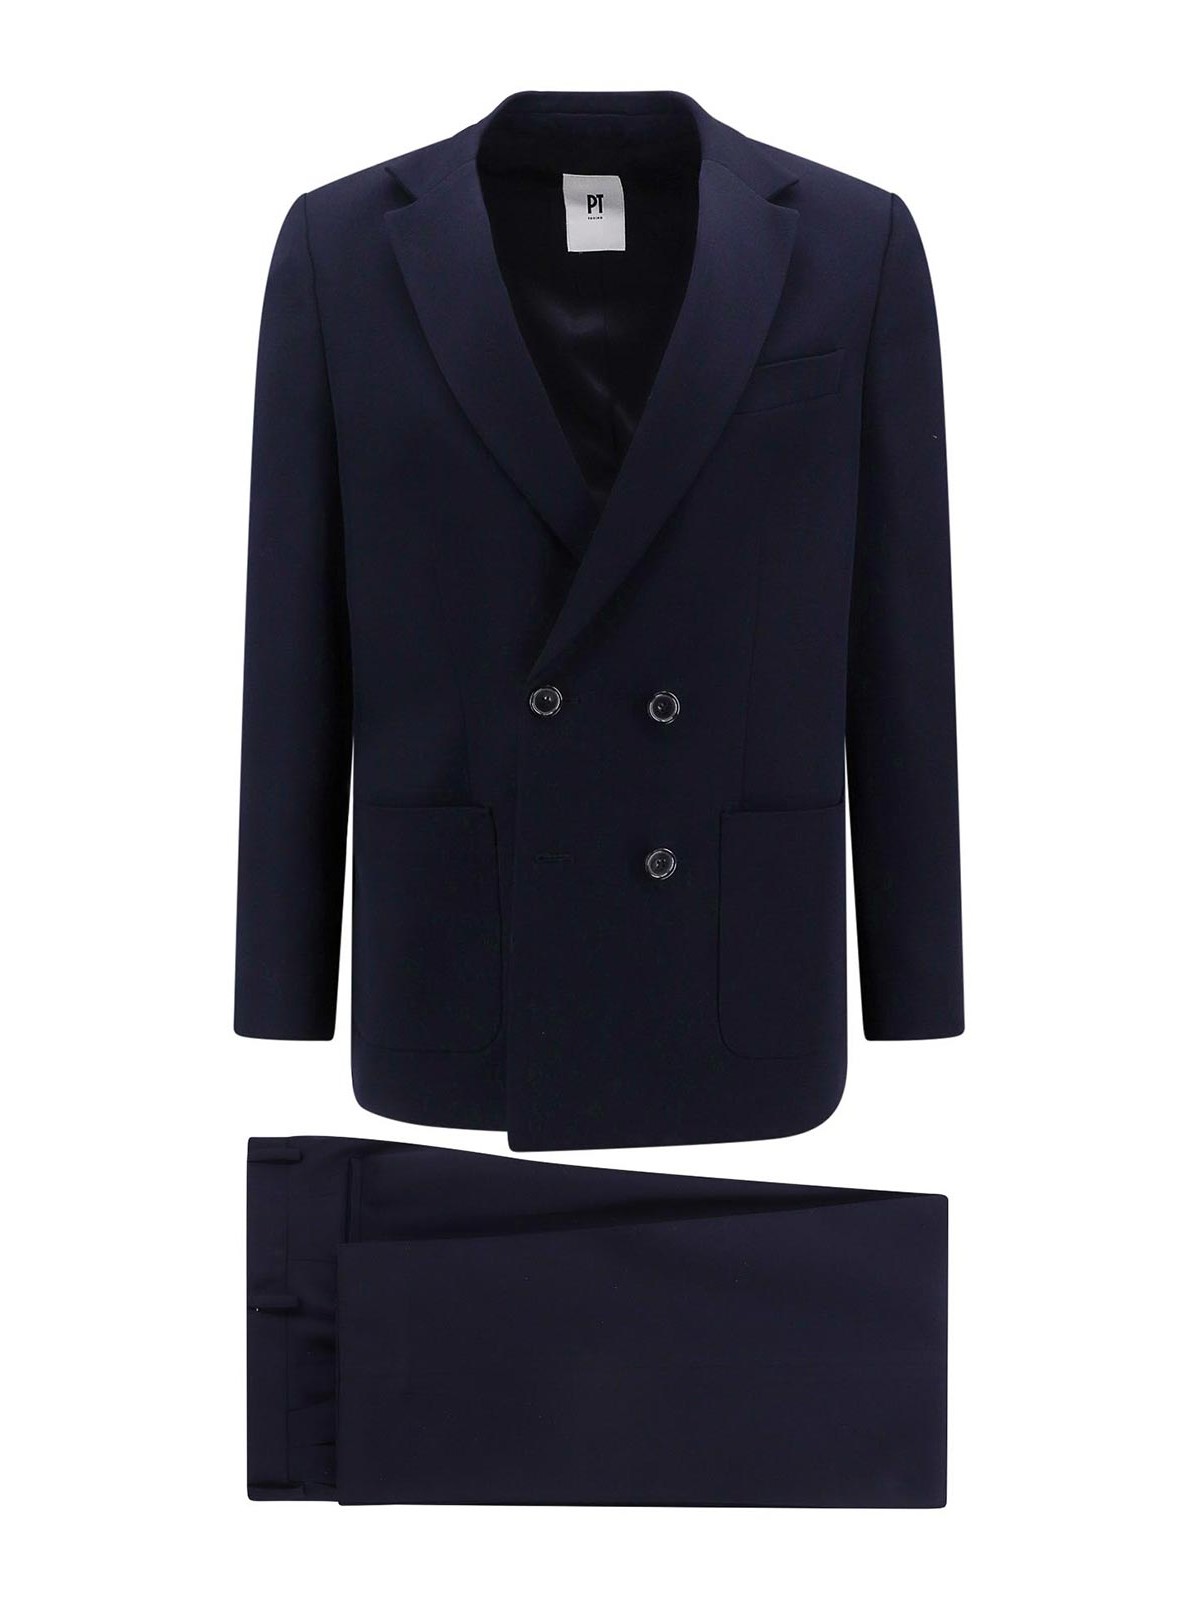 Pt Torino Double-breasted Virgin Wool Suit In Blue